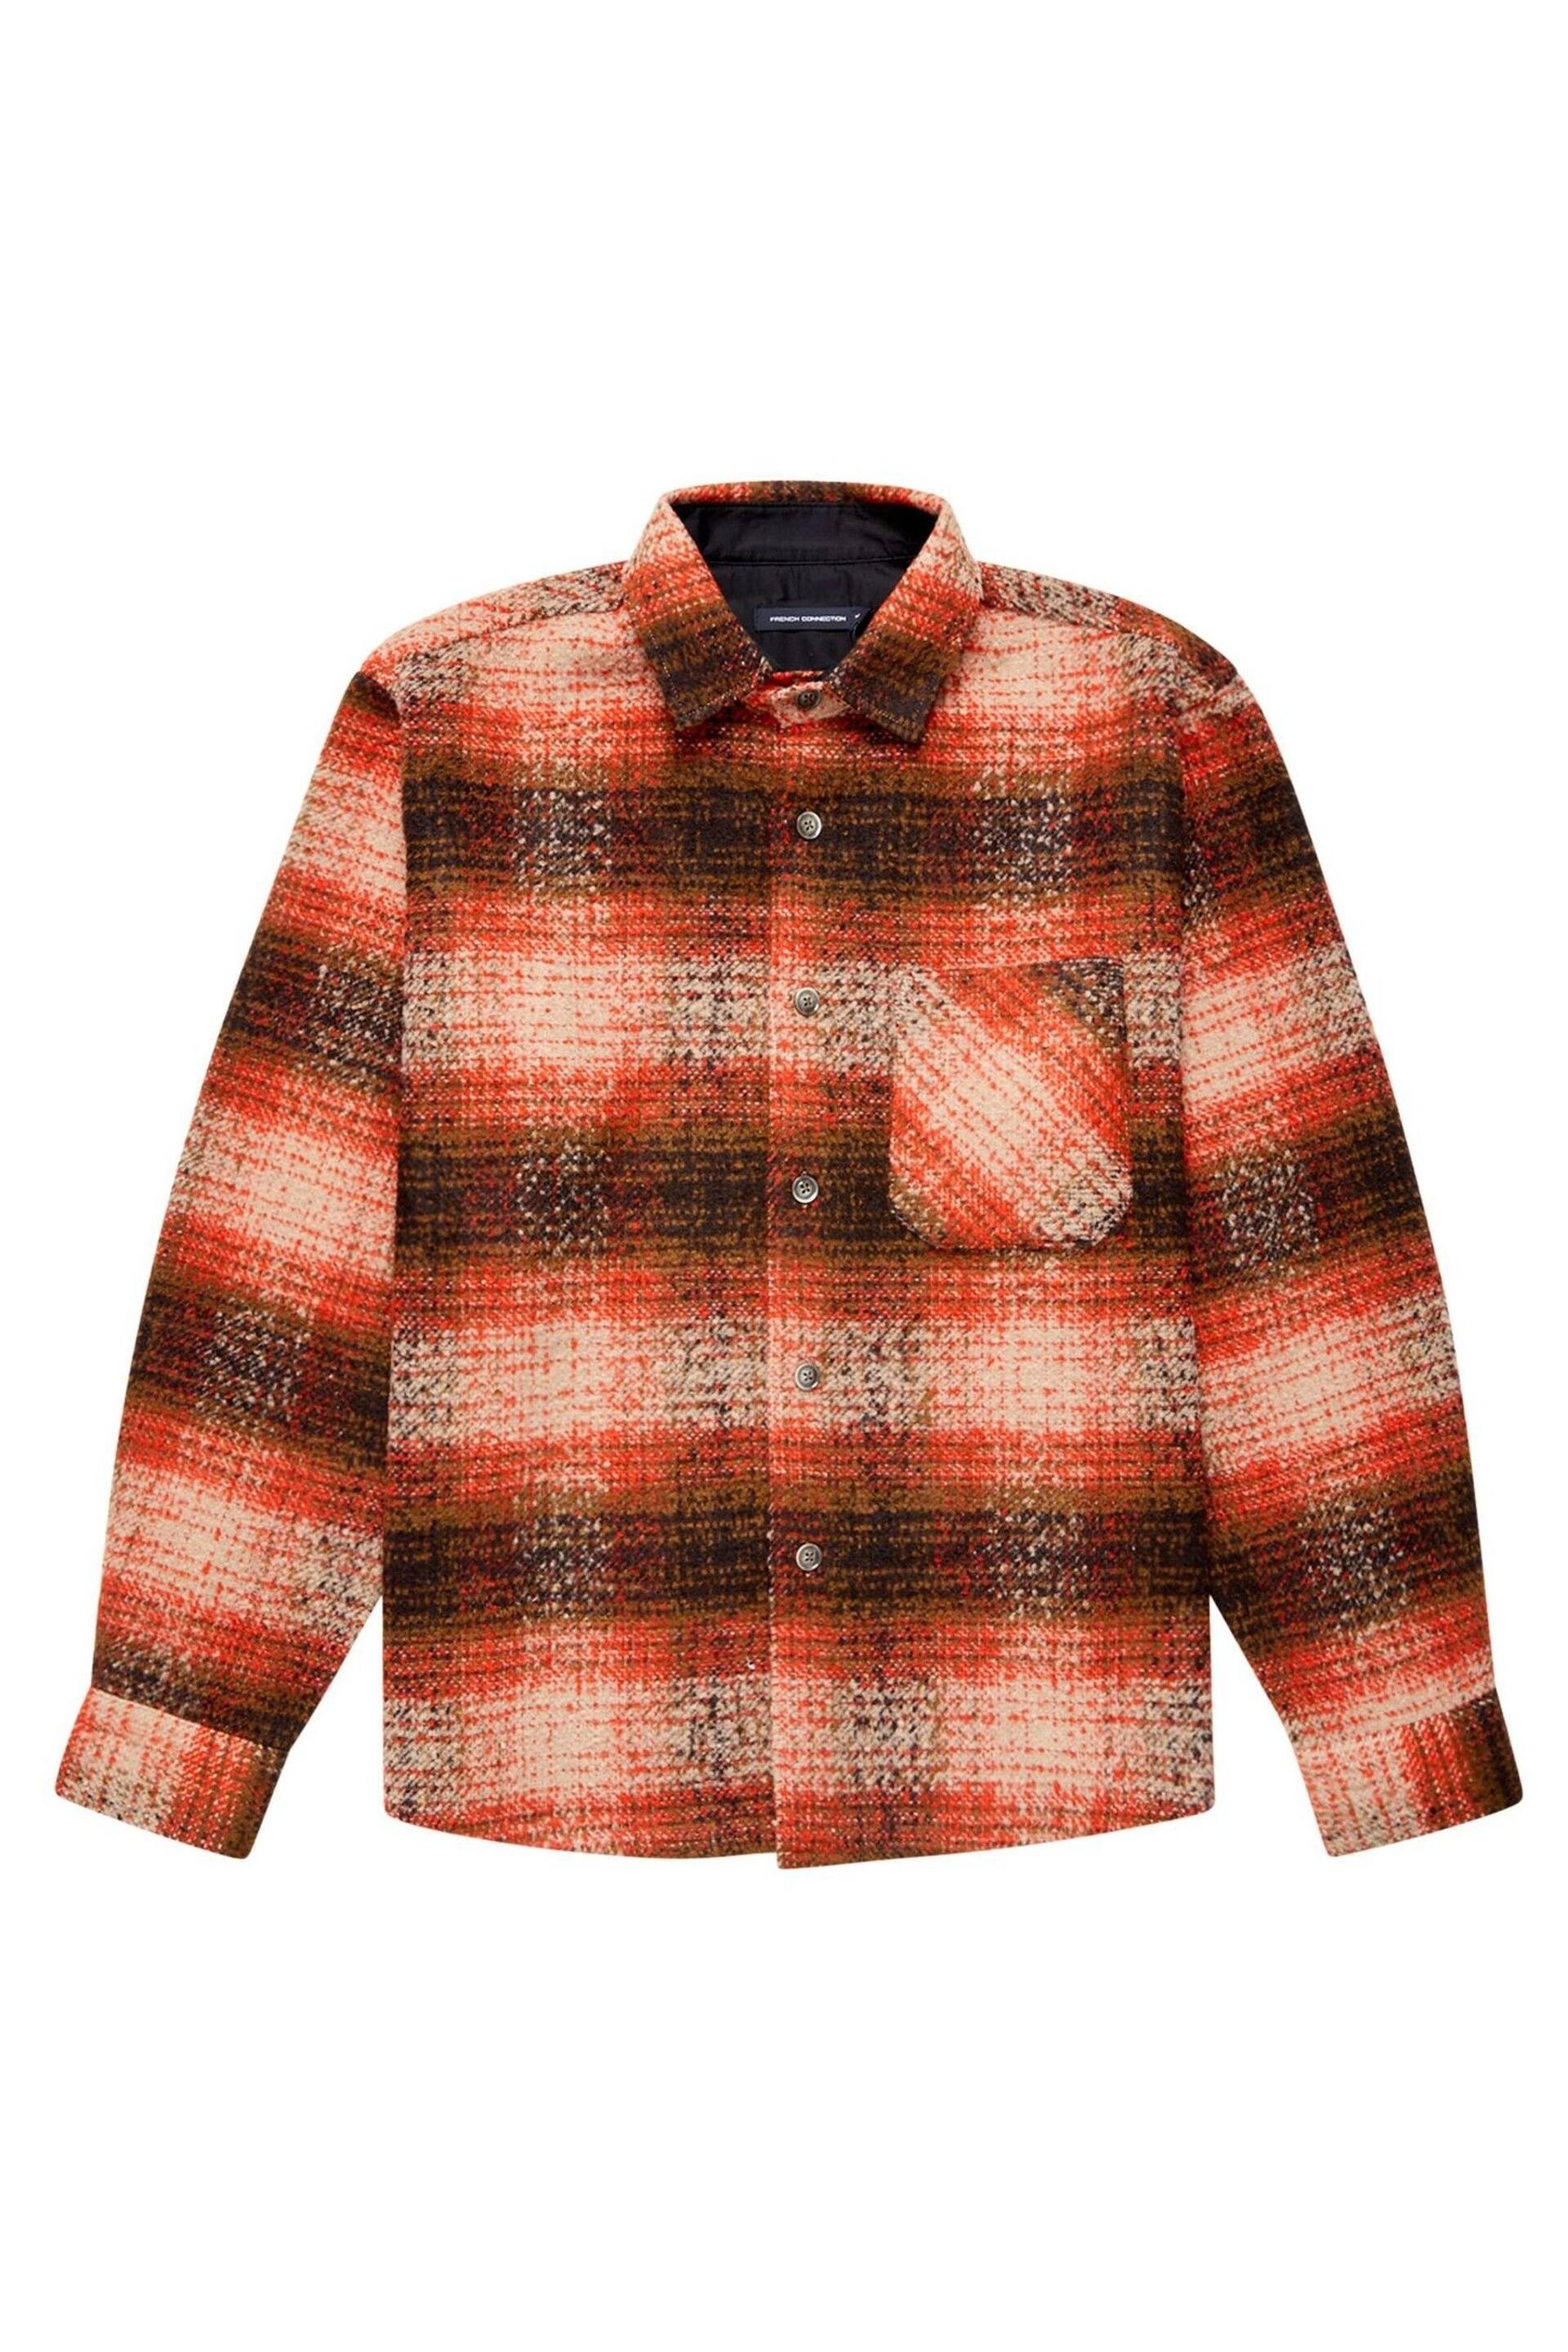 French Connection Rust Heavy Check Overshirt Long Sleeve Shirt - Image 6 of 6